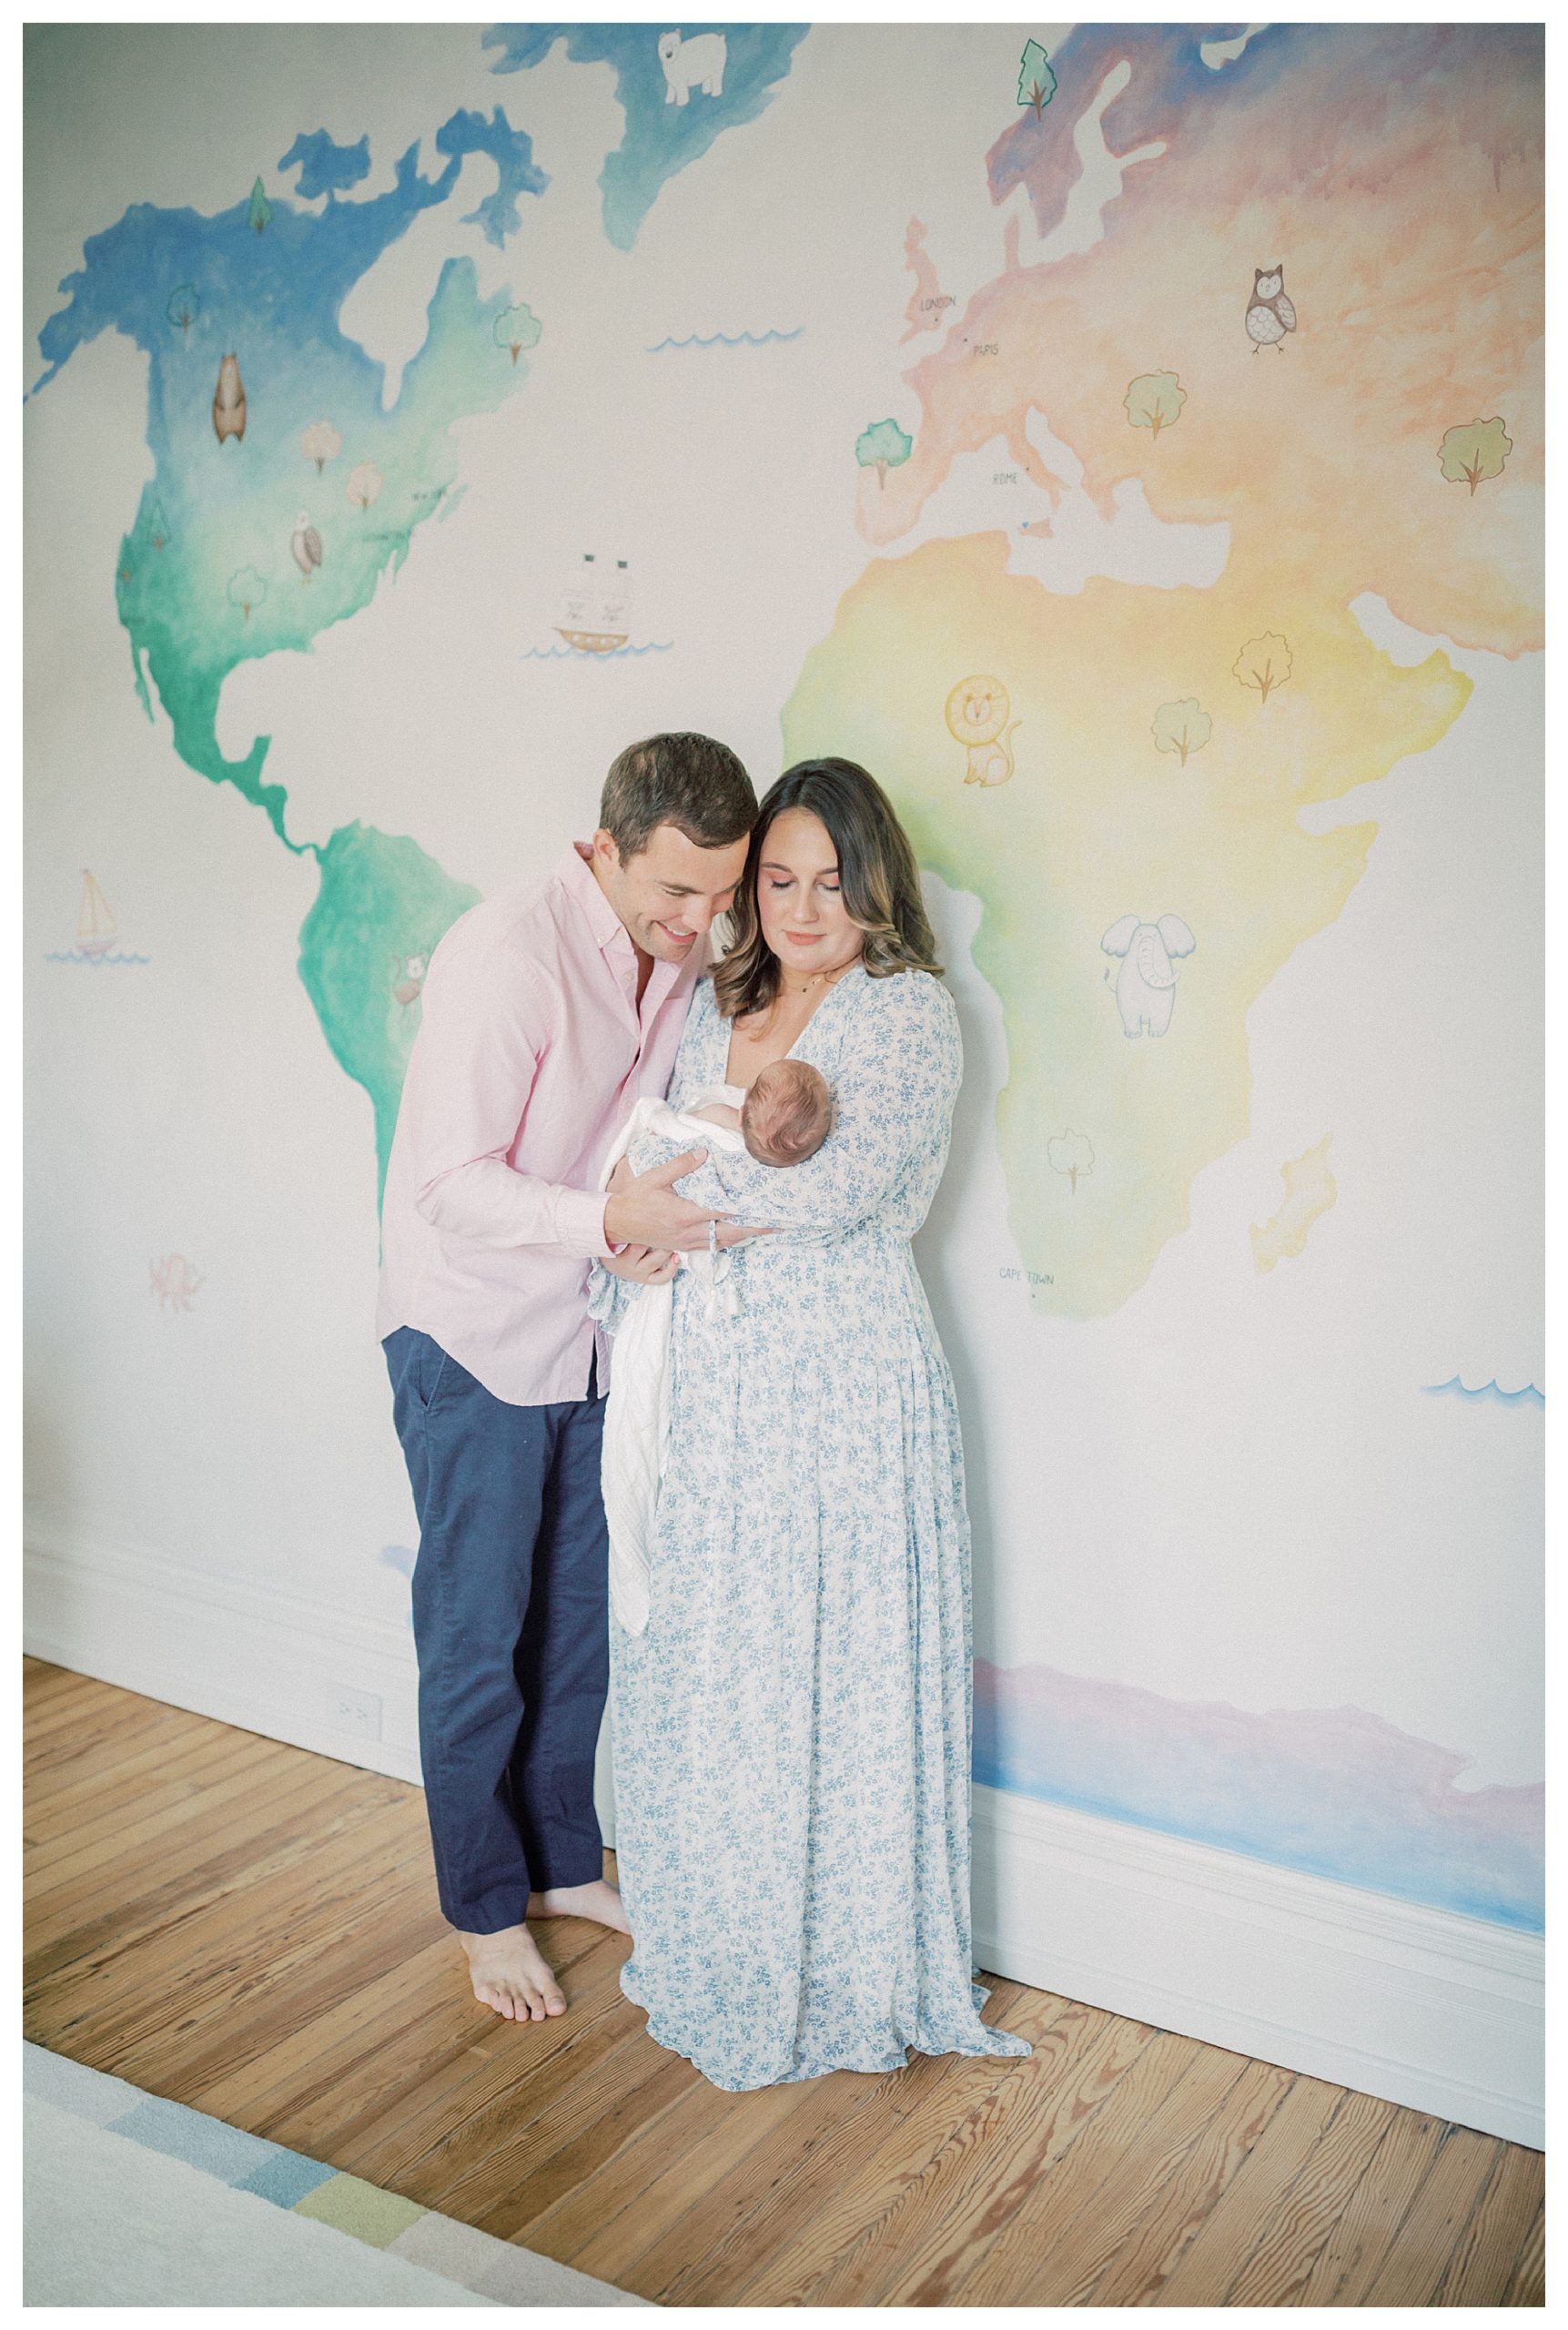 Father leans over and smiles at newborn baby held by mother as they stand in front of colorful painted mural in the nursery.